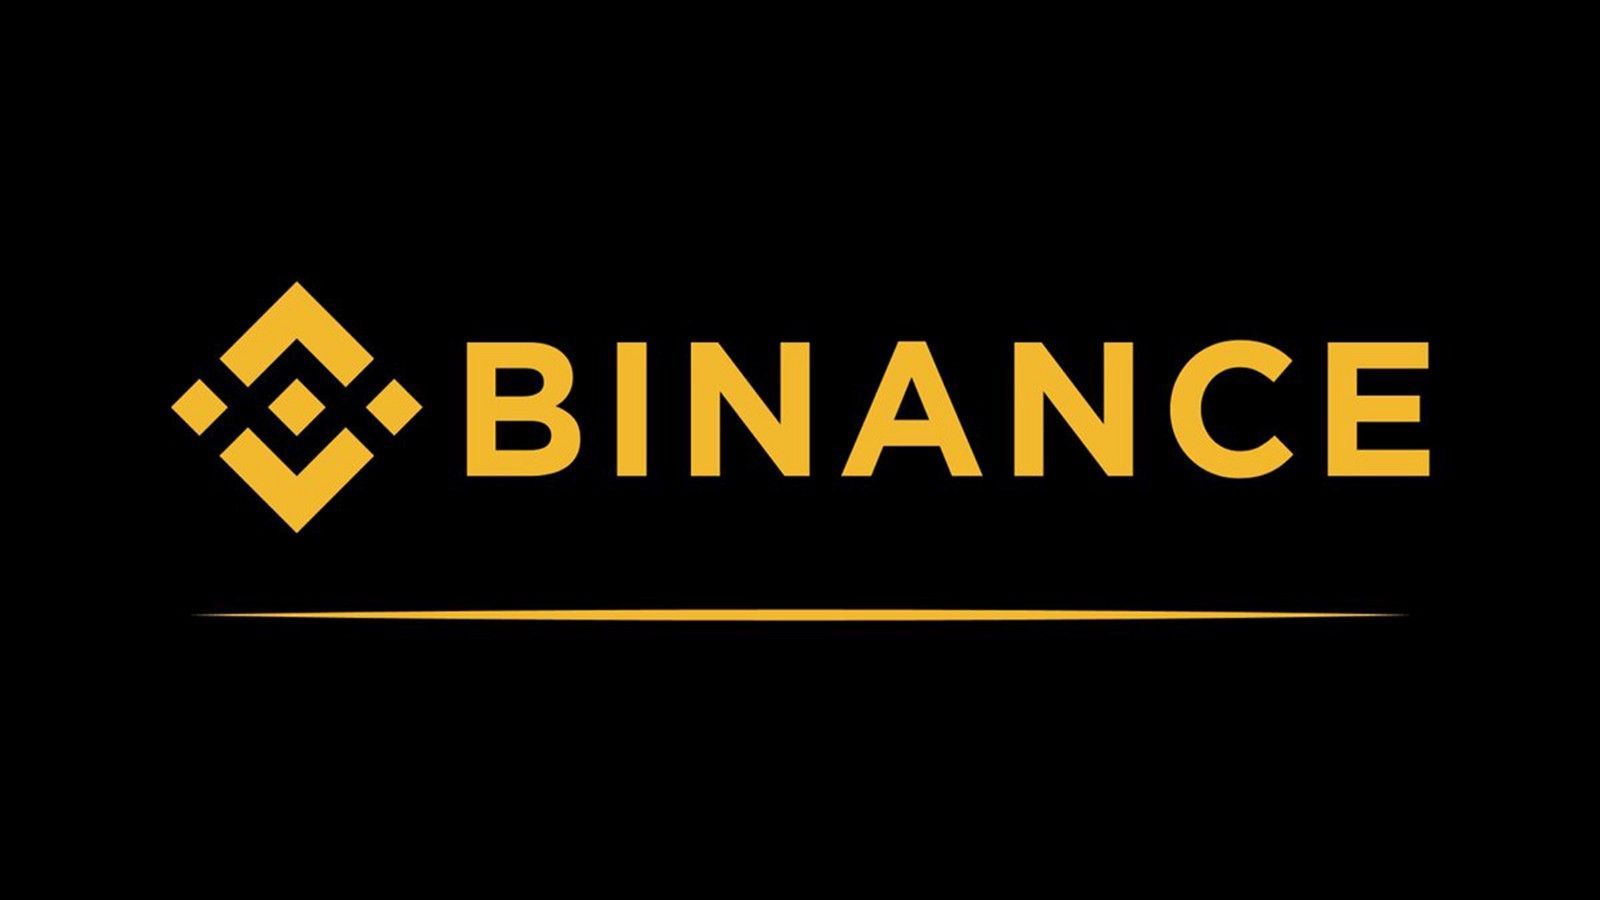 Binance backtracks and revises its stance on anonymizing cryptocurrencies